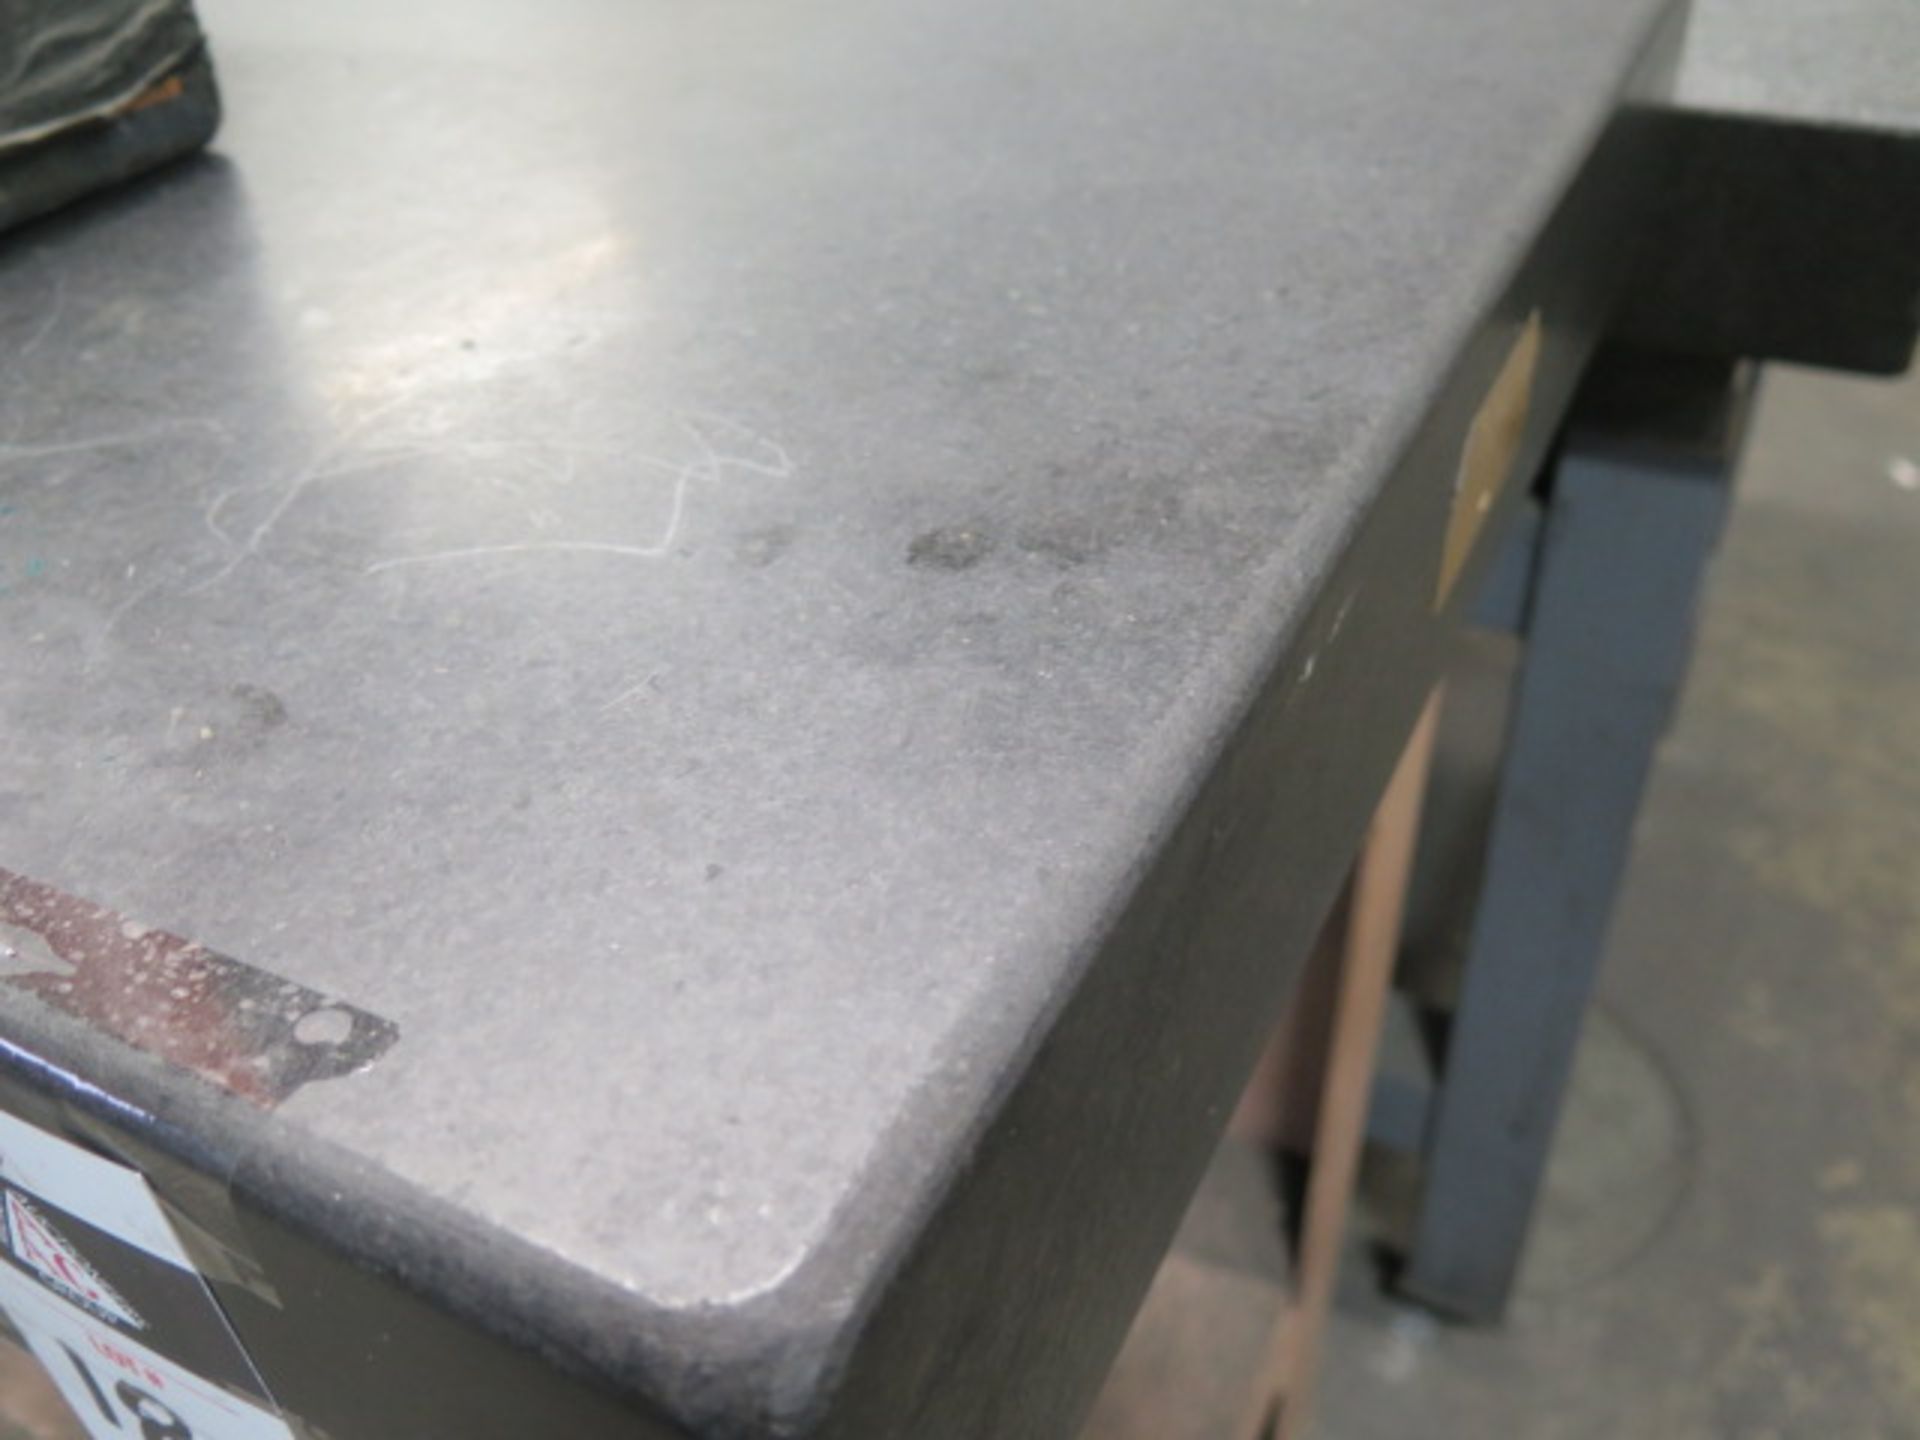 Mojave 24" x 48" x 9" 4-Ledge granite Surface Plate w/ Stand (SOLD AS-IS - NO WARRANTY) - Image 3 of 4